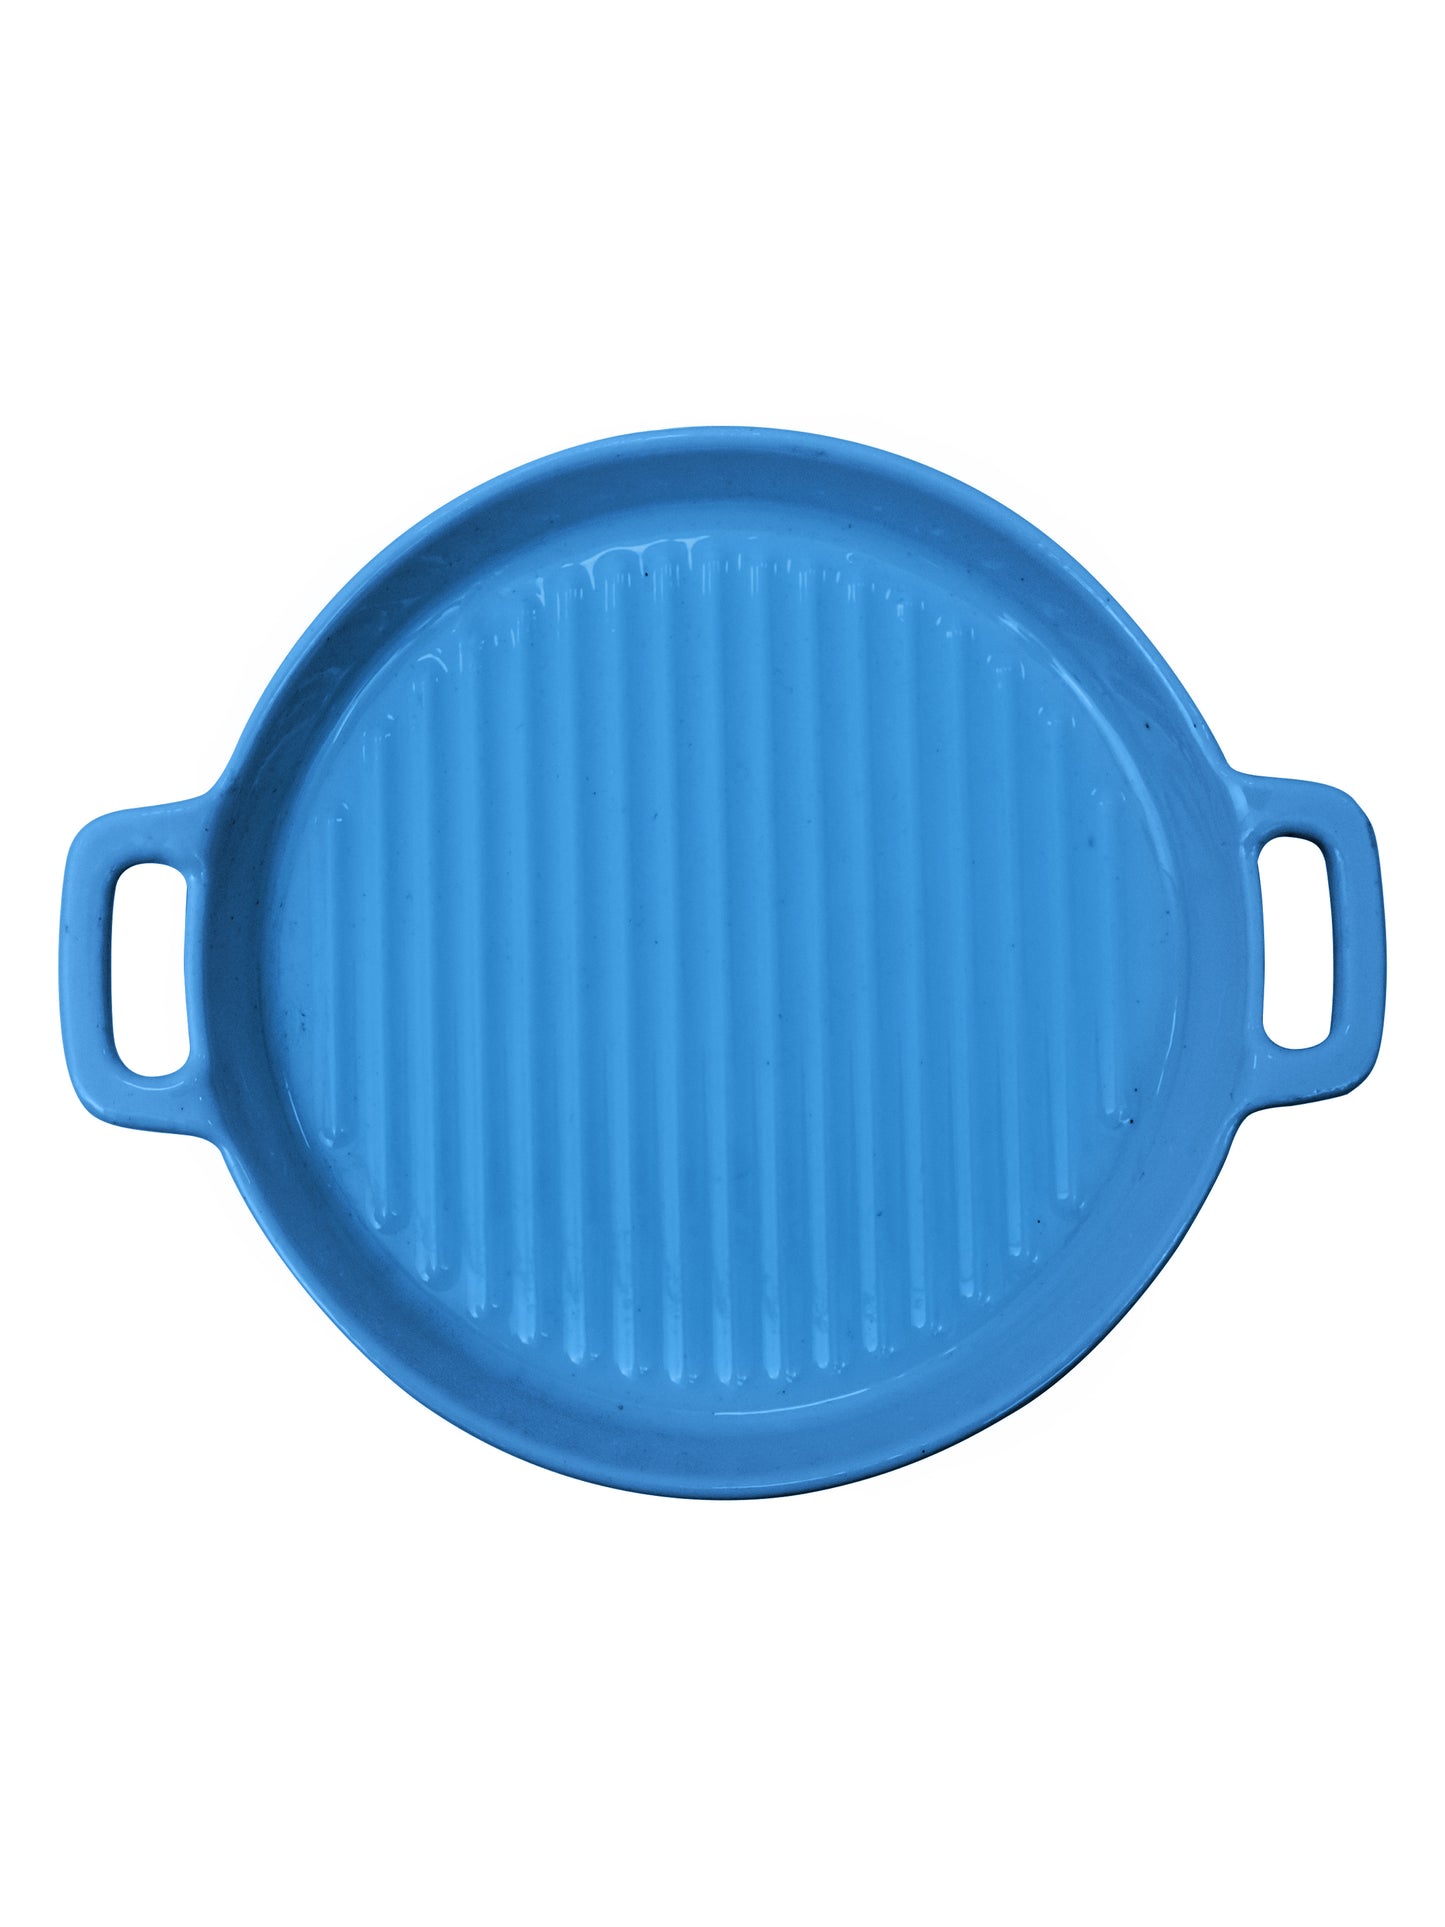 Ceramic Round with Handle Grill Plates for Serving, Blue